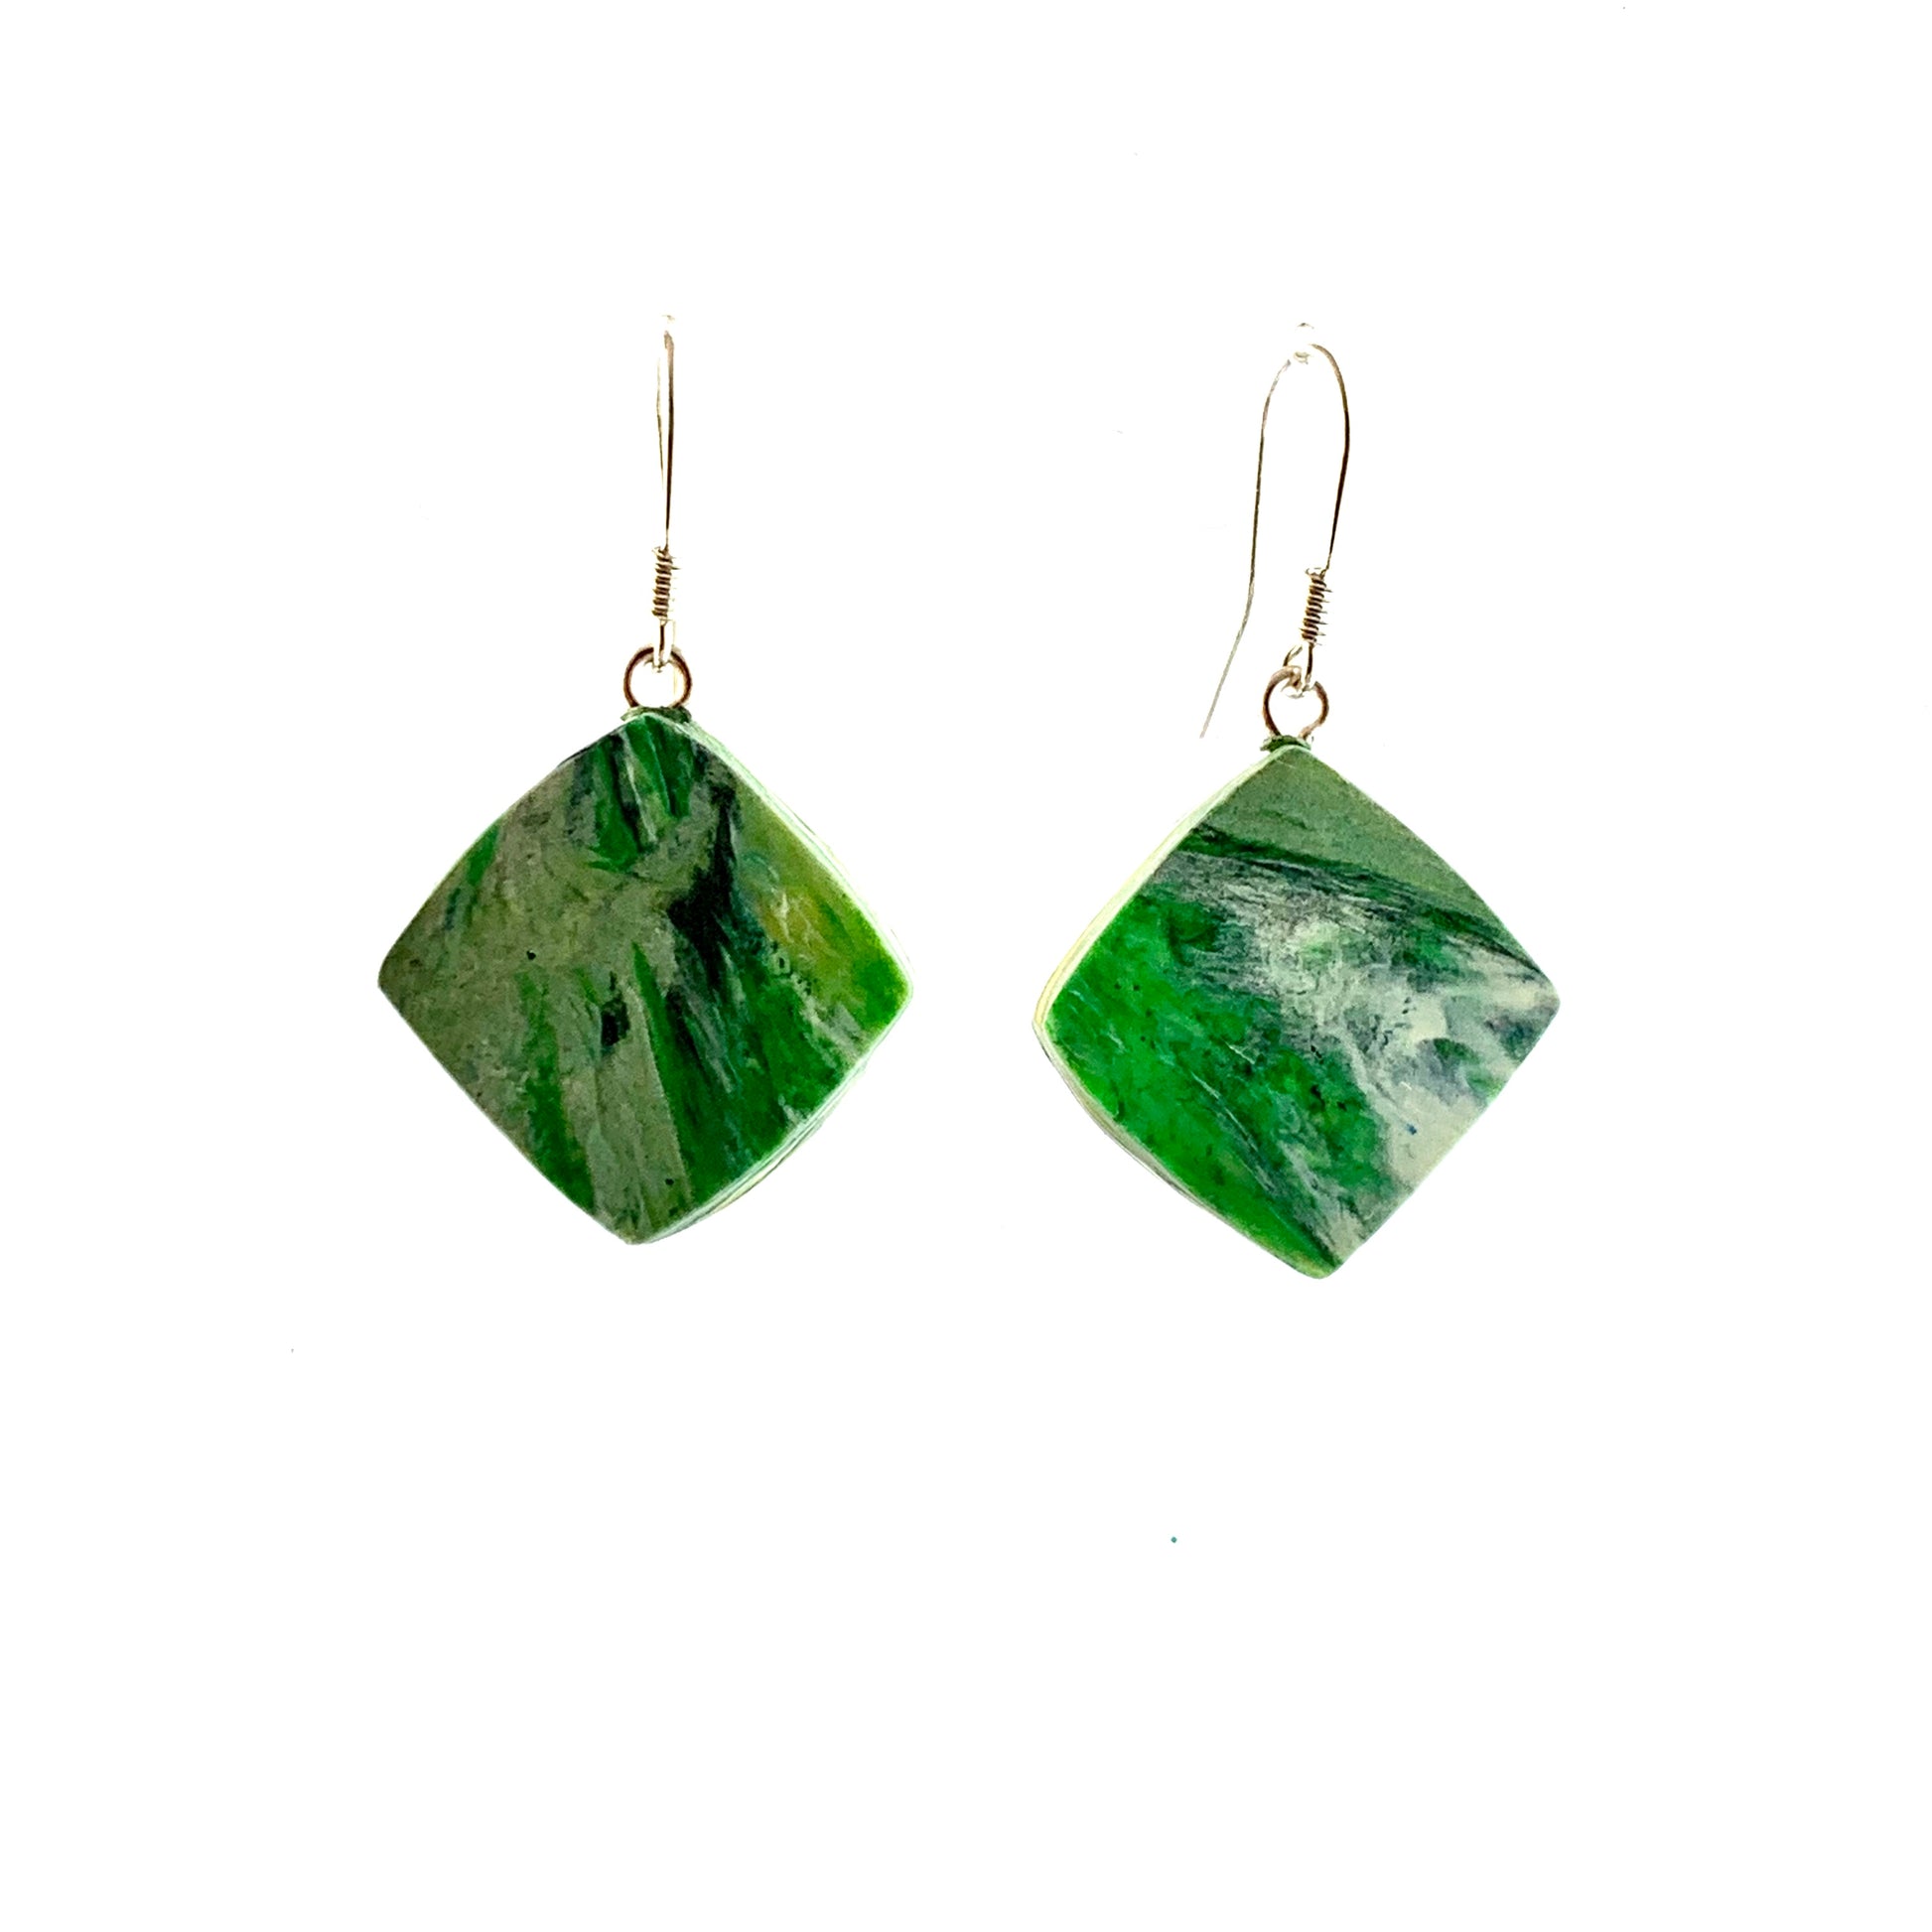 Dangle earrings made of recycled plastic